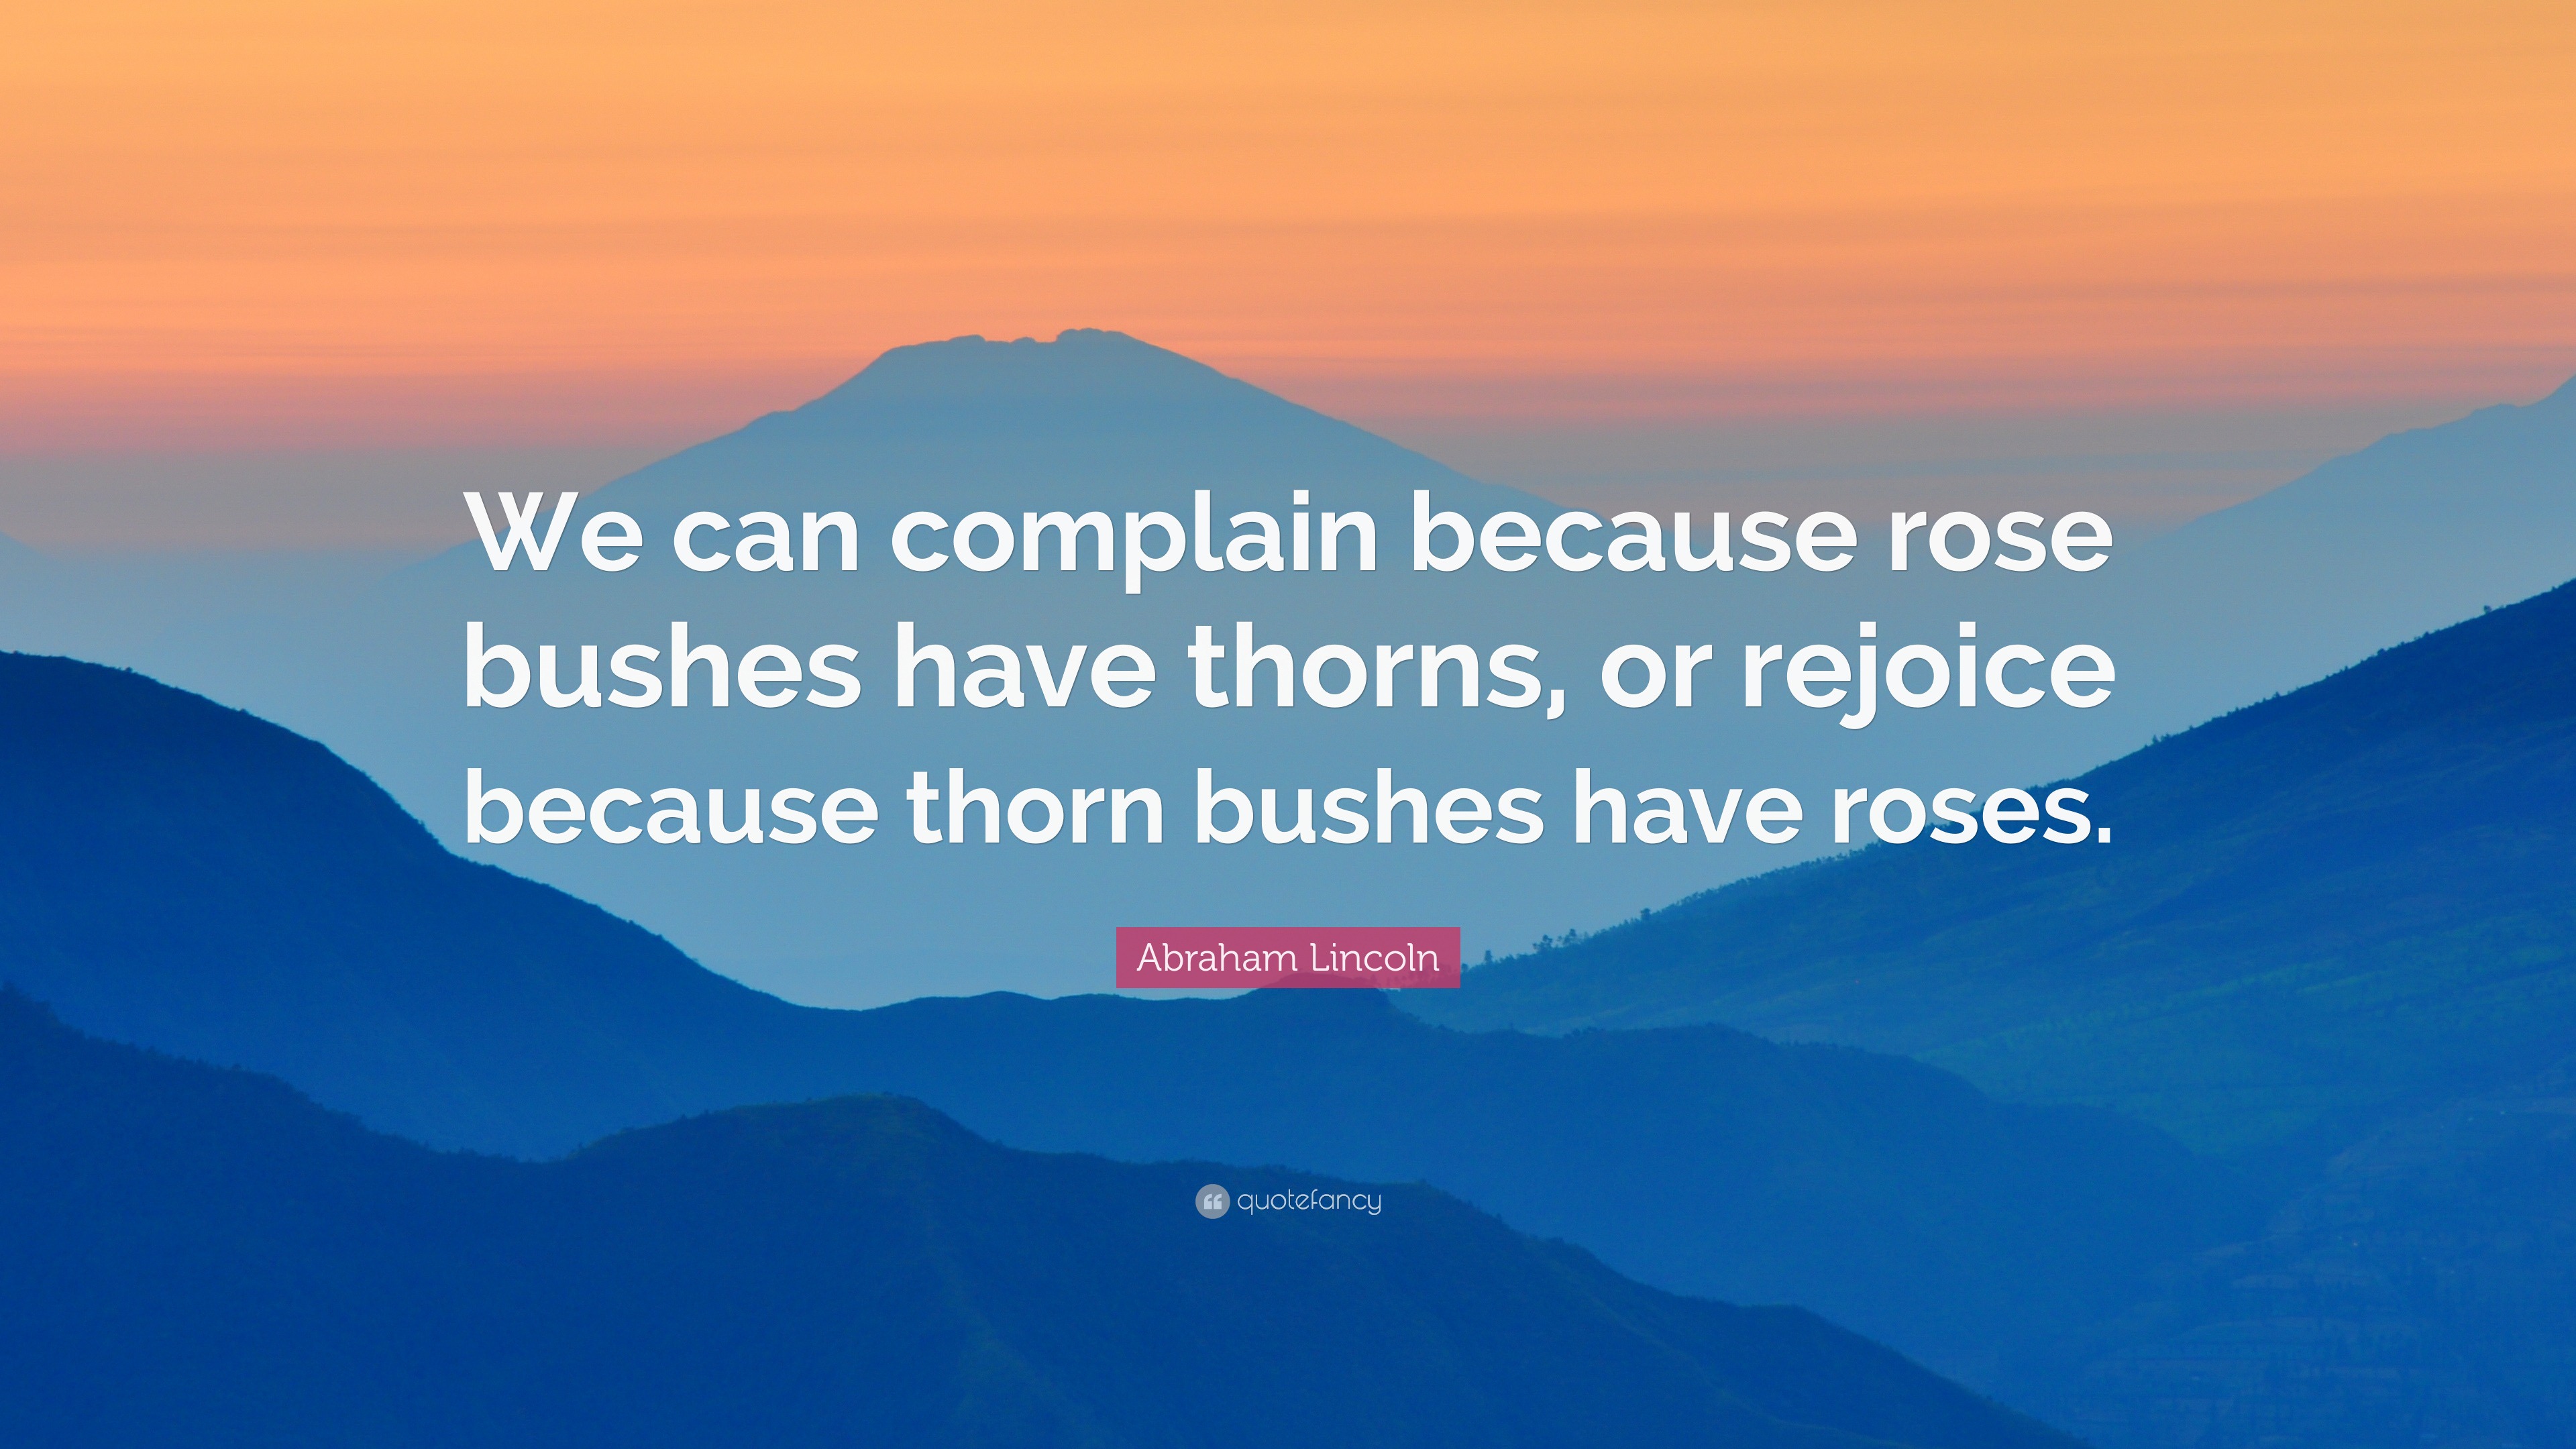 Abraham Lincoln Quote: “We can complain because rose bushes have thorns